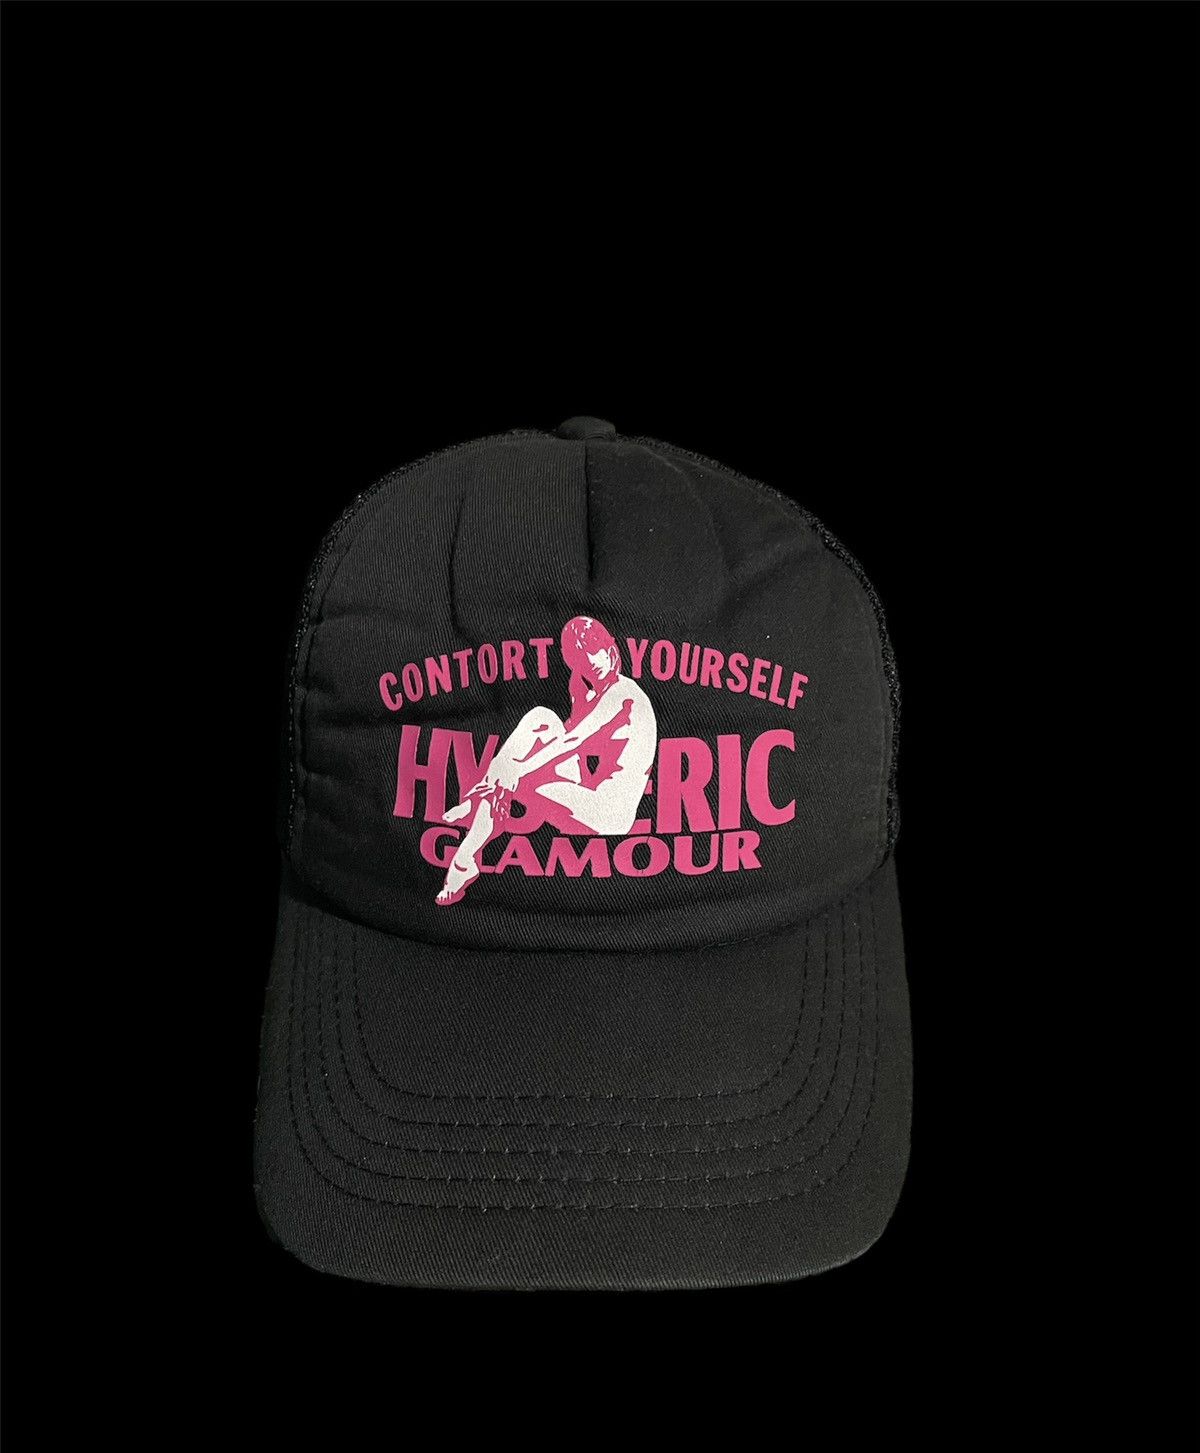 Men's Hysteric Glamour Hats | Grailed